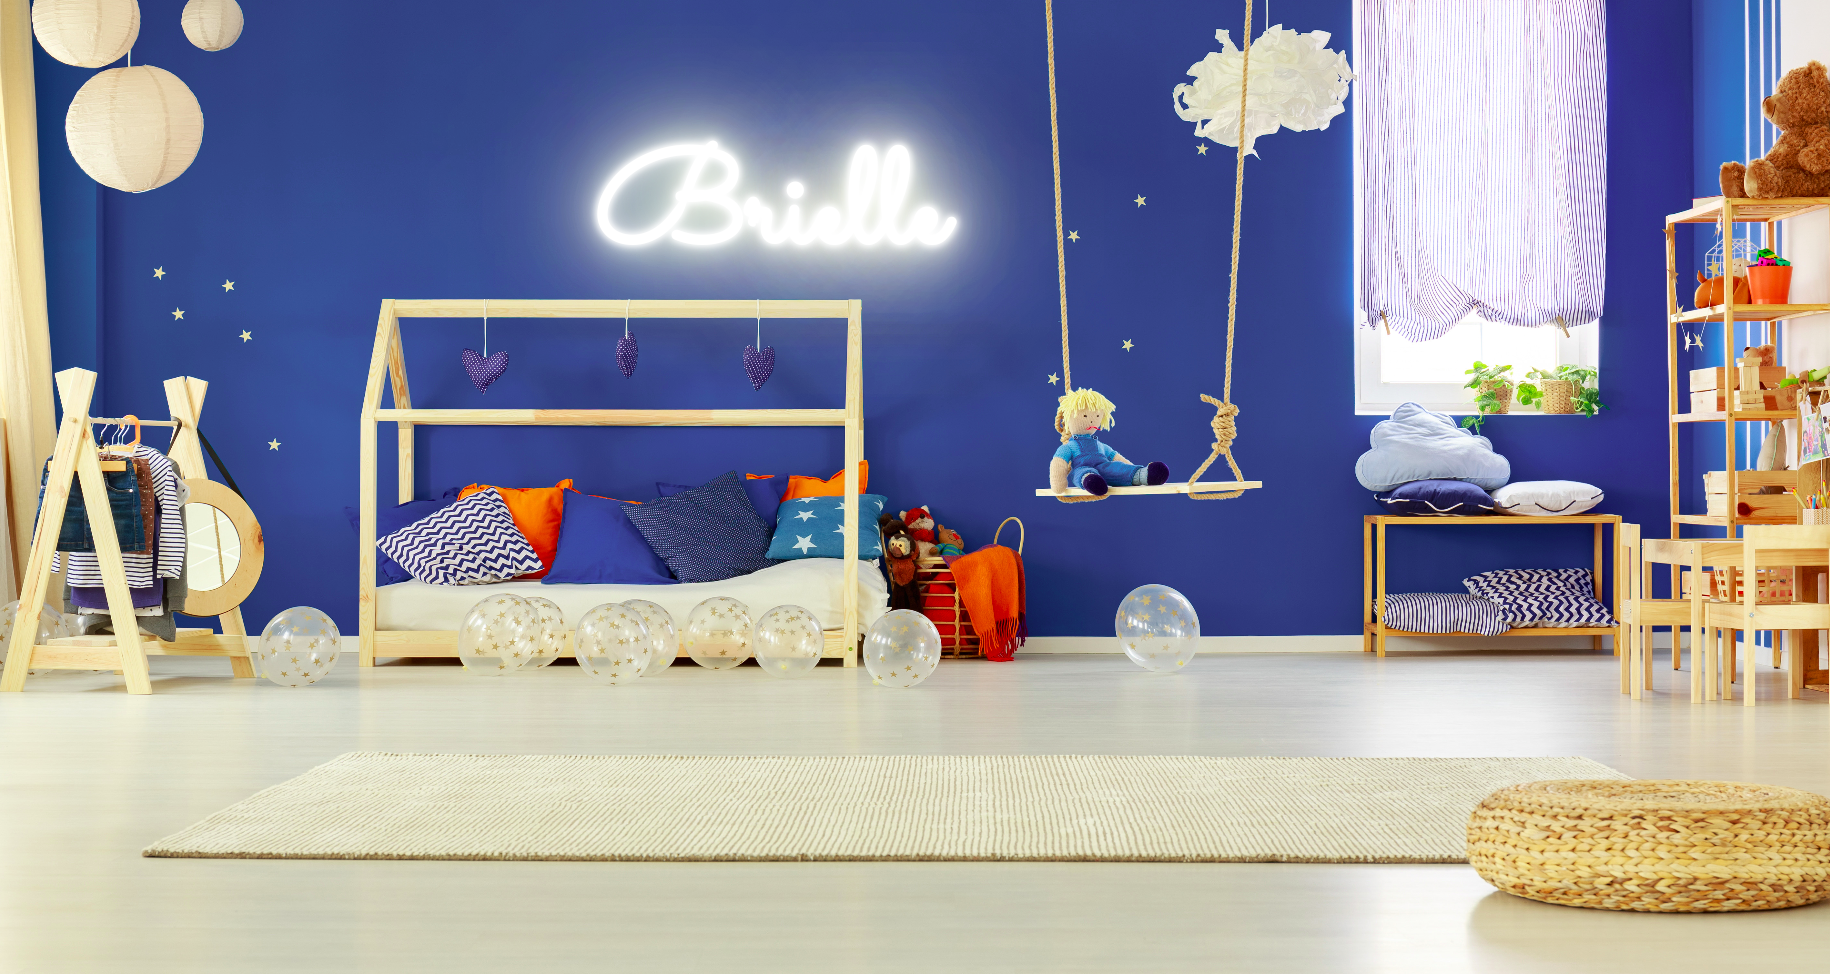 "Brielle" Baby Name LED Neon Sign